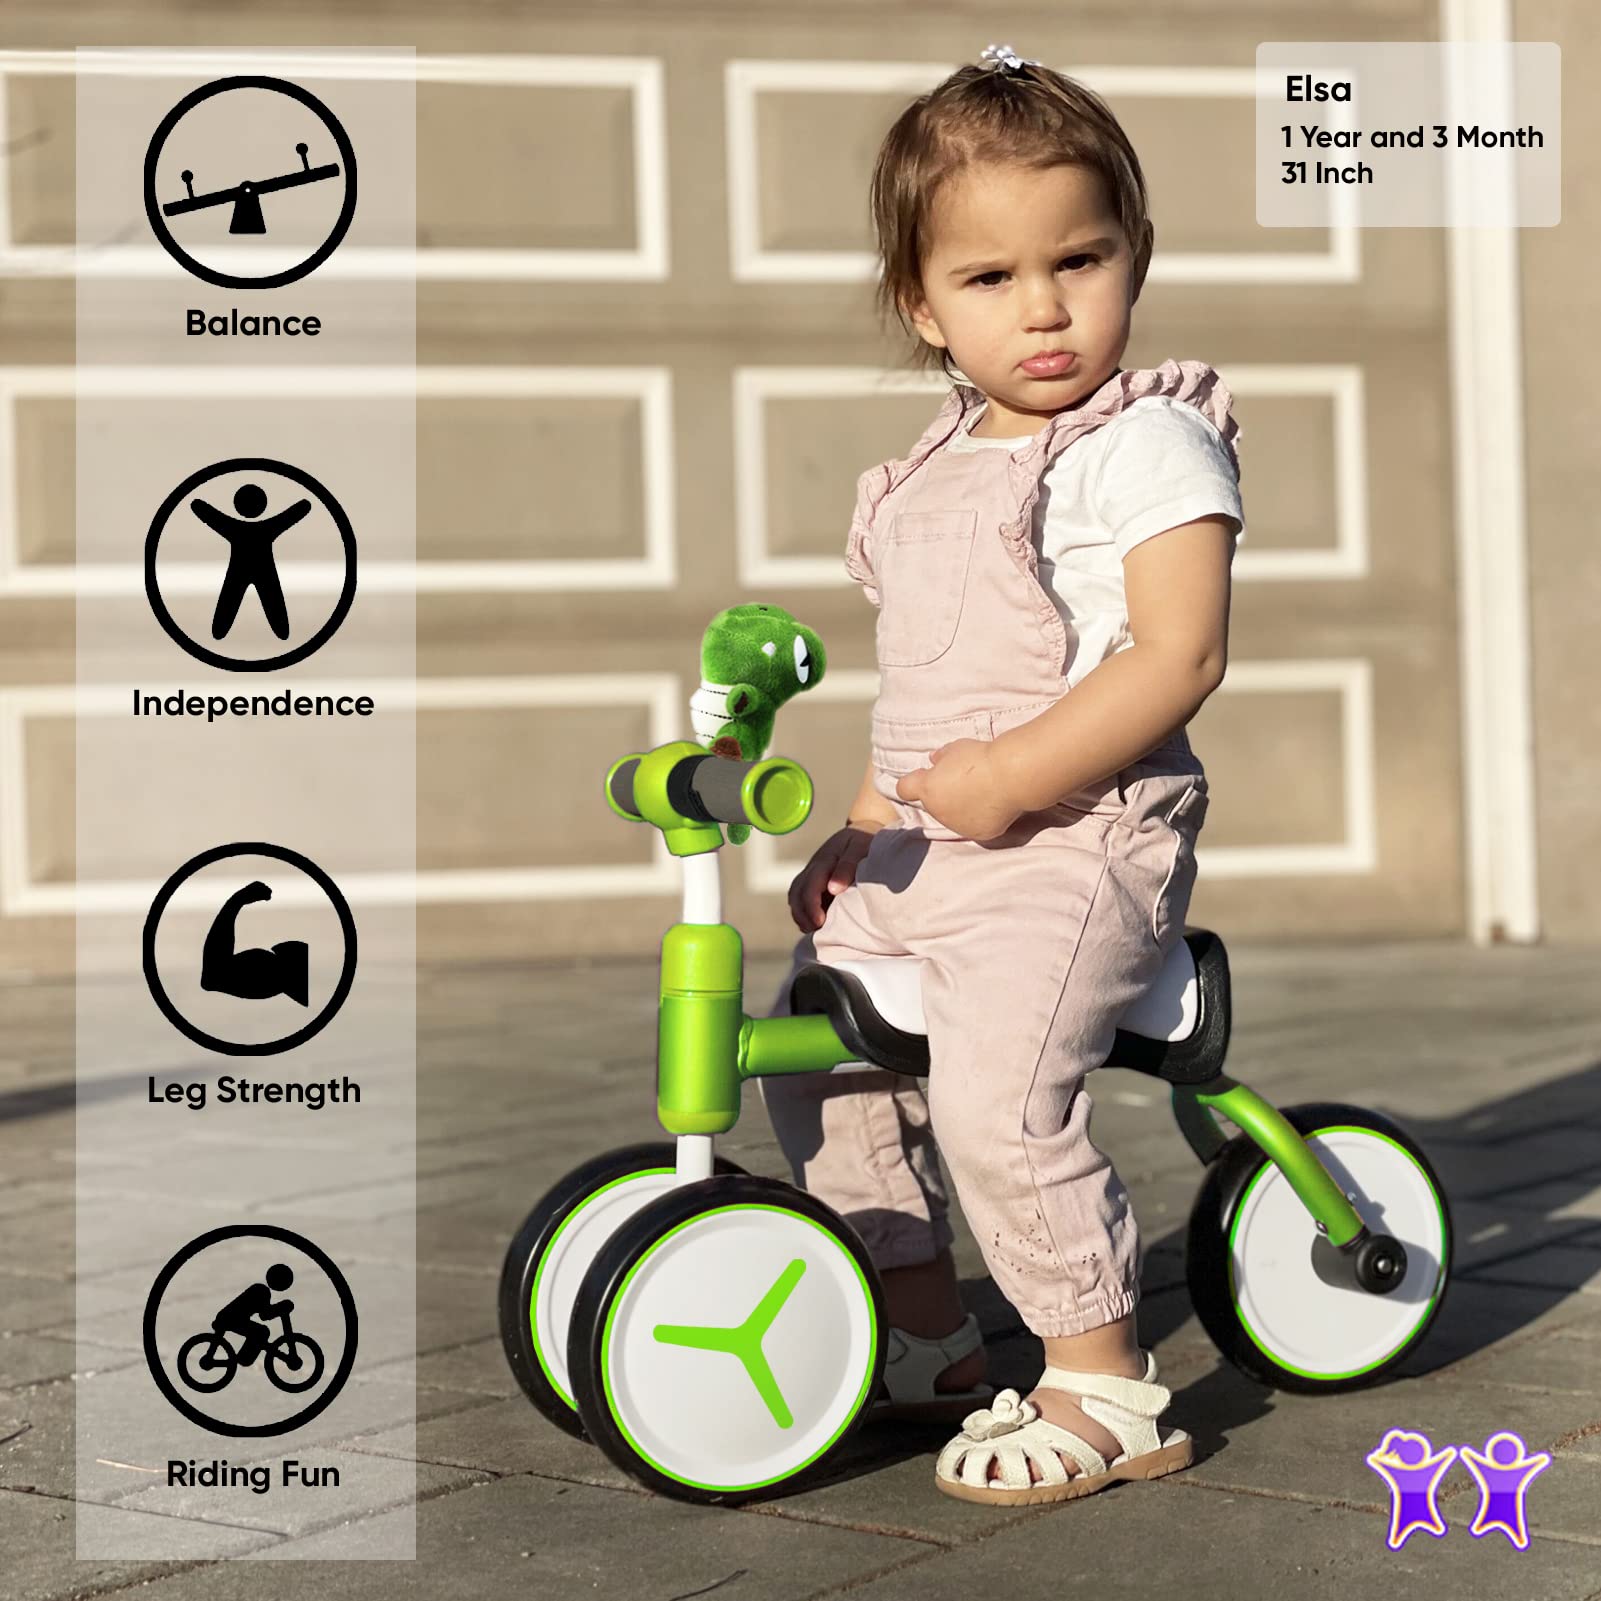 KRIDDO Baby Balance Bike for 1-2 Year Old Boy and Girl, Toddler Mini Bike for One Year Old First Birthday Gifts Baby Toys 12 Months to 2 Year Old Ride-on Toys Gifts Indoor Outdoor Balance Bike